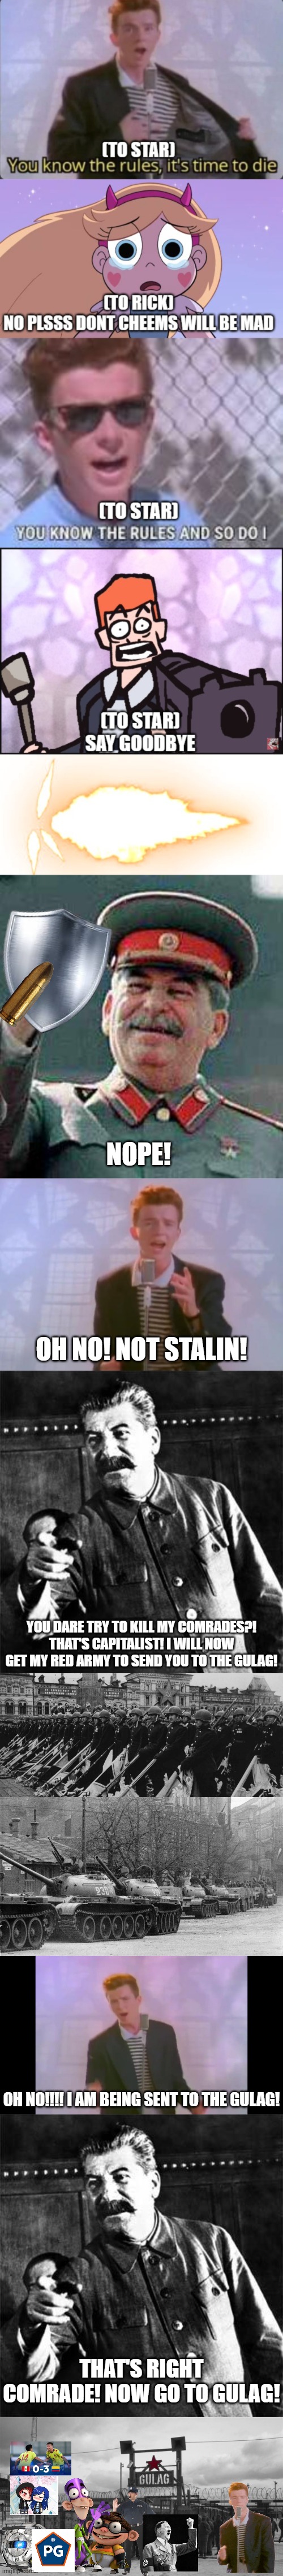 Stalin Stopping Rick Astley for Killing one of his Comrades | NOPE! OH NO! NOT STALIN! YOU DARE TRY TO KILL MY COMRADES?! THAT'S CAPITALIST! I WILL NOW GET MY RED ARMY TO SEND YOU TO THE GULAG! OH NO!!!! I AM BEING SENT TO THE GULAG! THAT'S RIGHT COMRADE! NOW GO TO GULAG! | image tagged in stalin says,rick astley,stalin,gulag | made w/ Imgflip meme maker